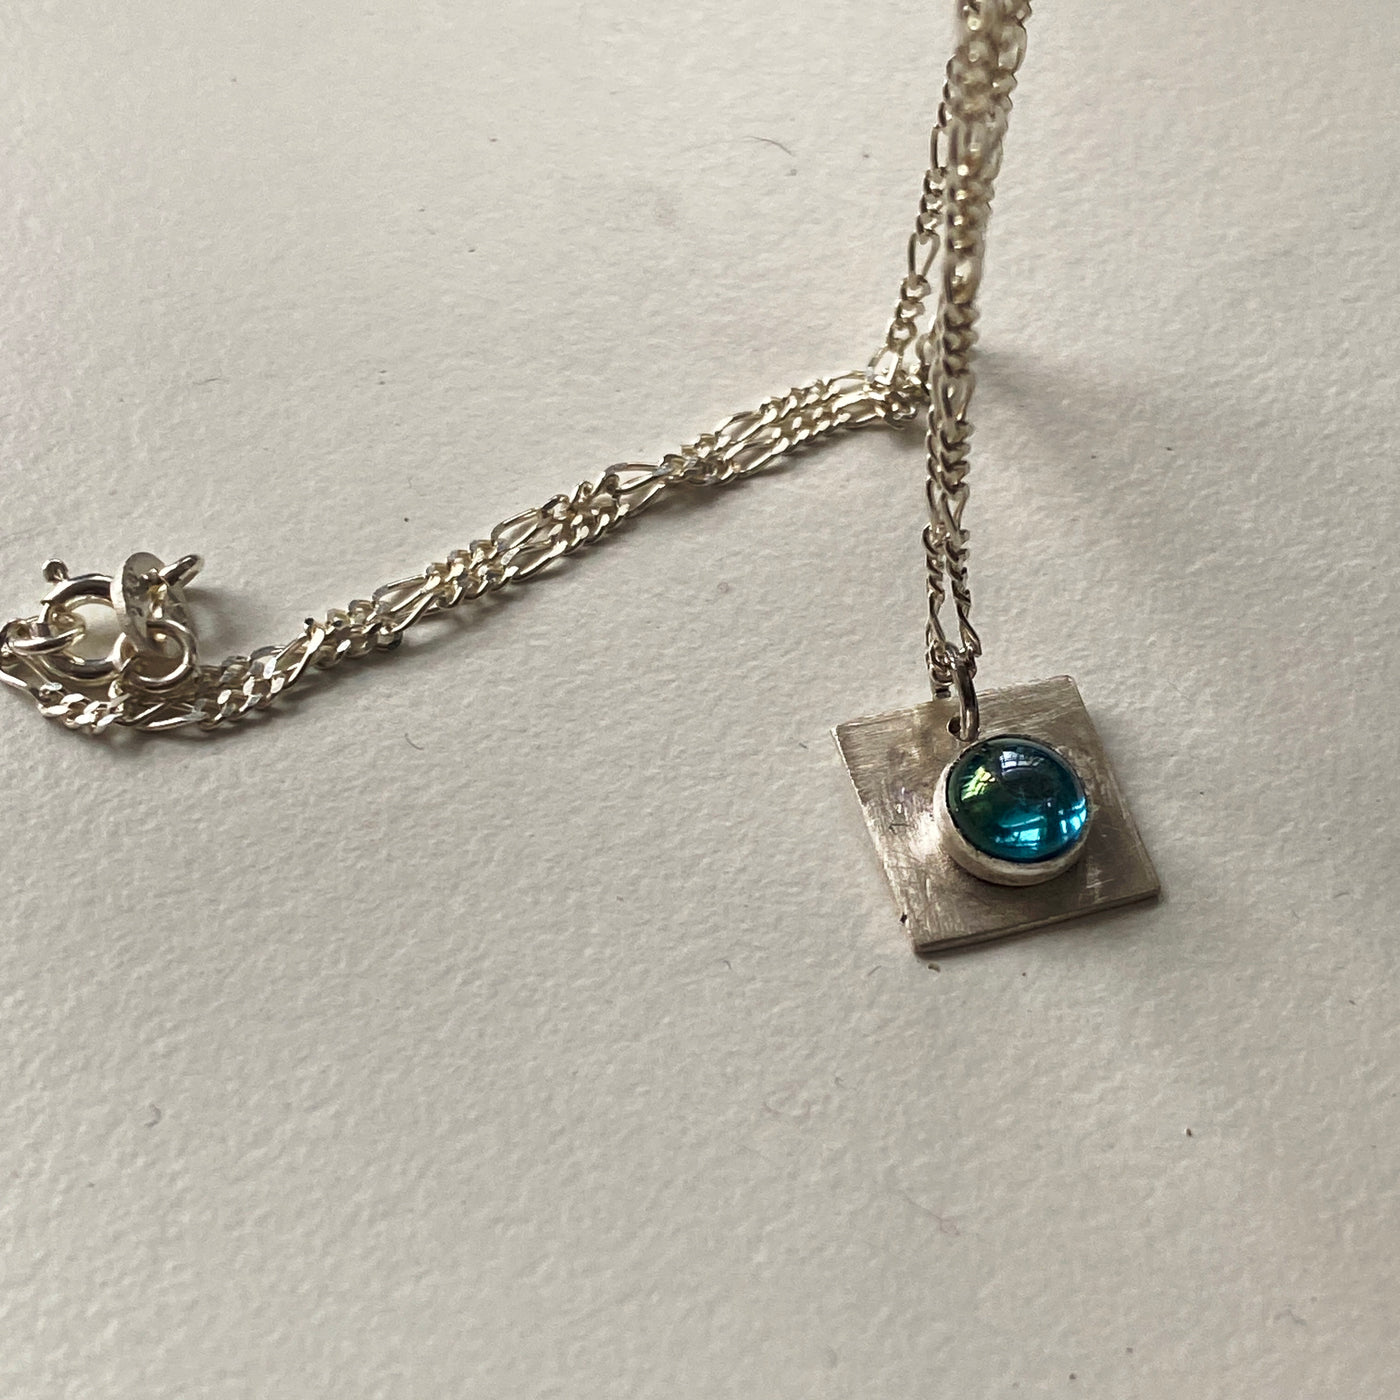 Square sterling round frame for a cabochon rainbow topaz 6 mm pendant on sterling silver chain